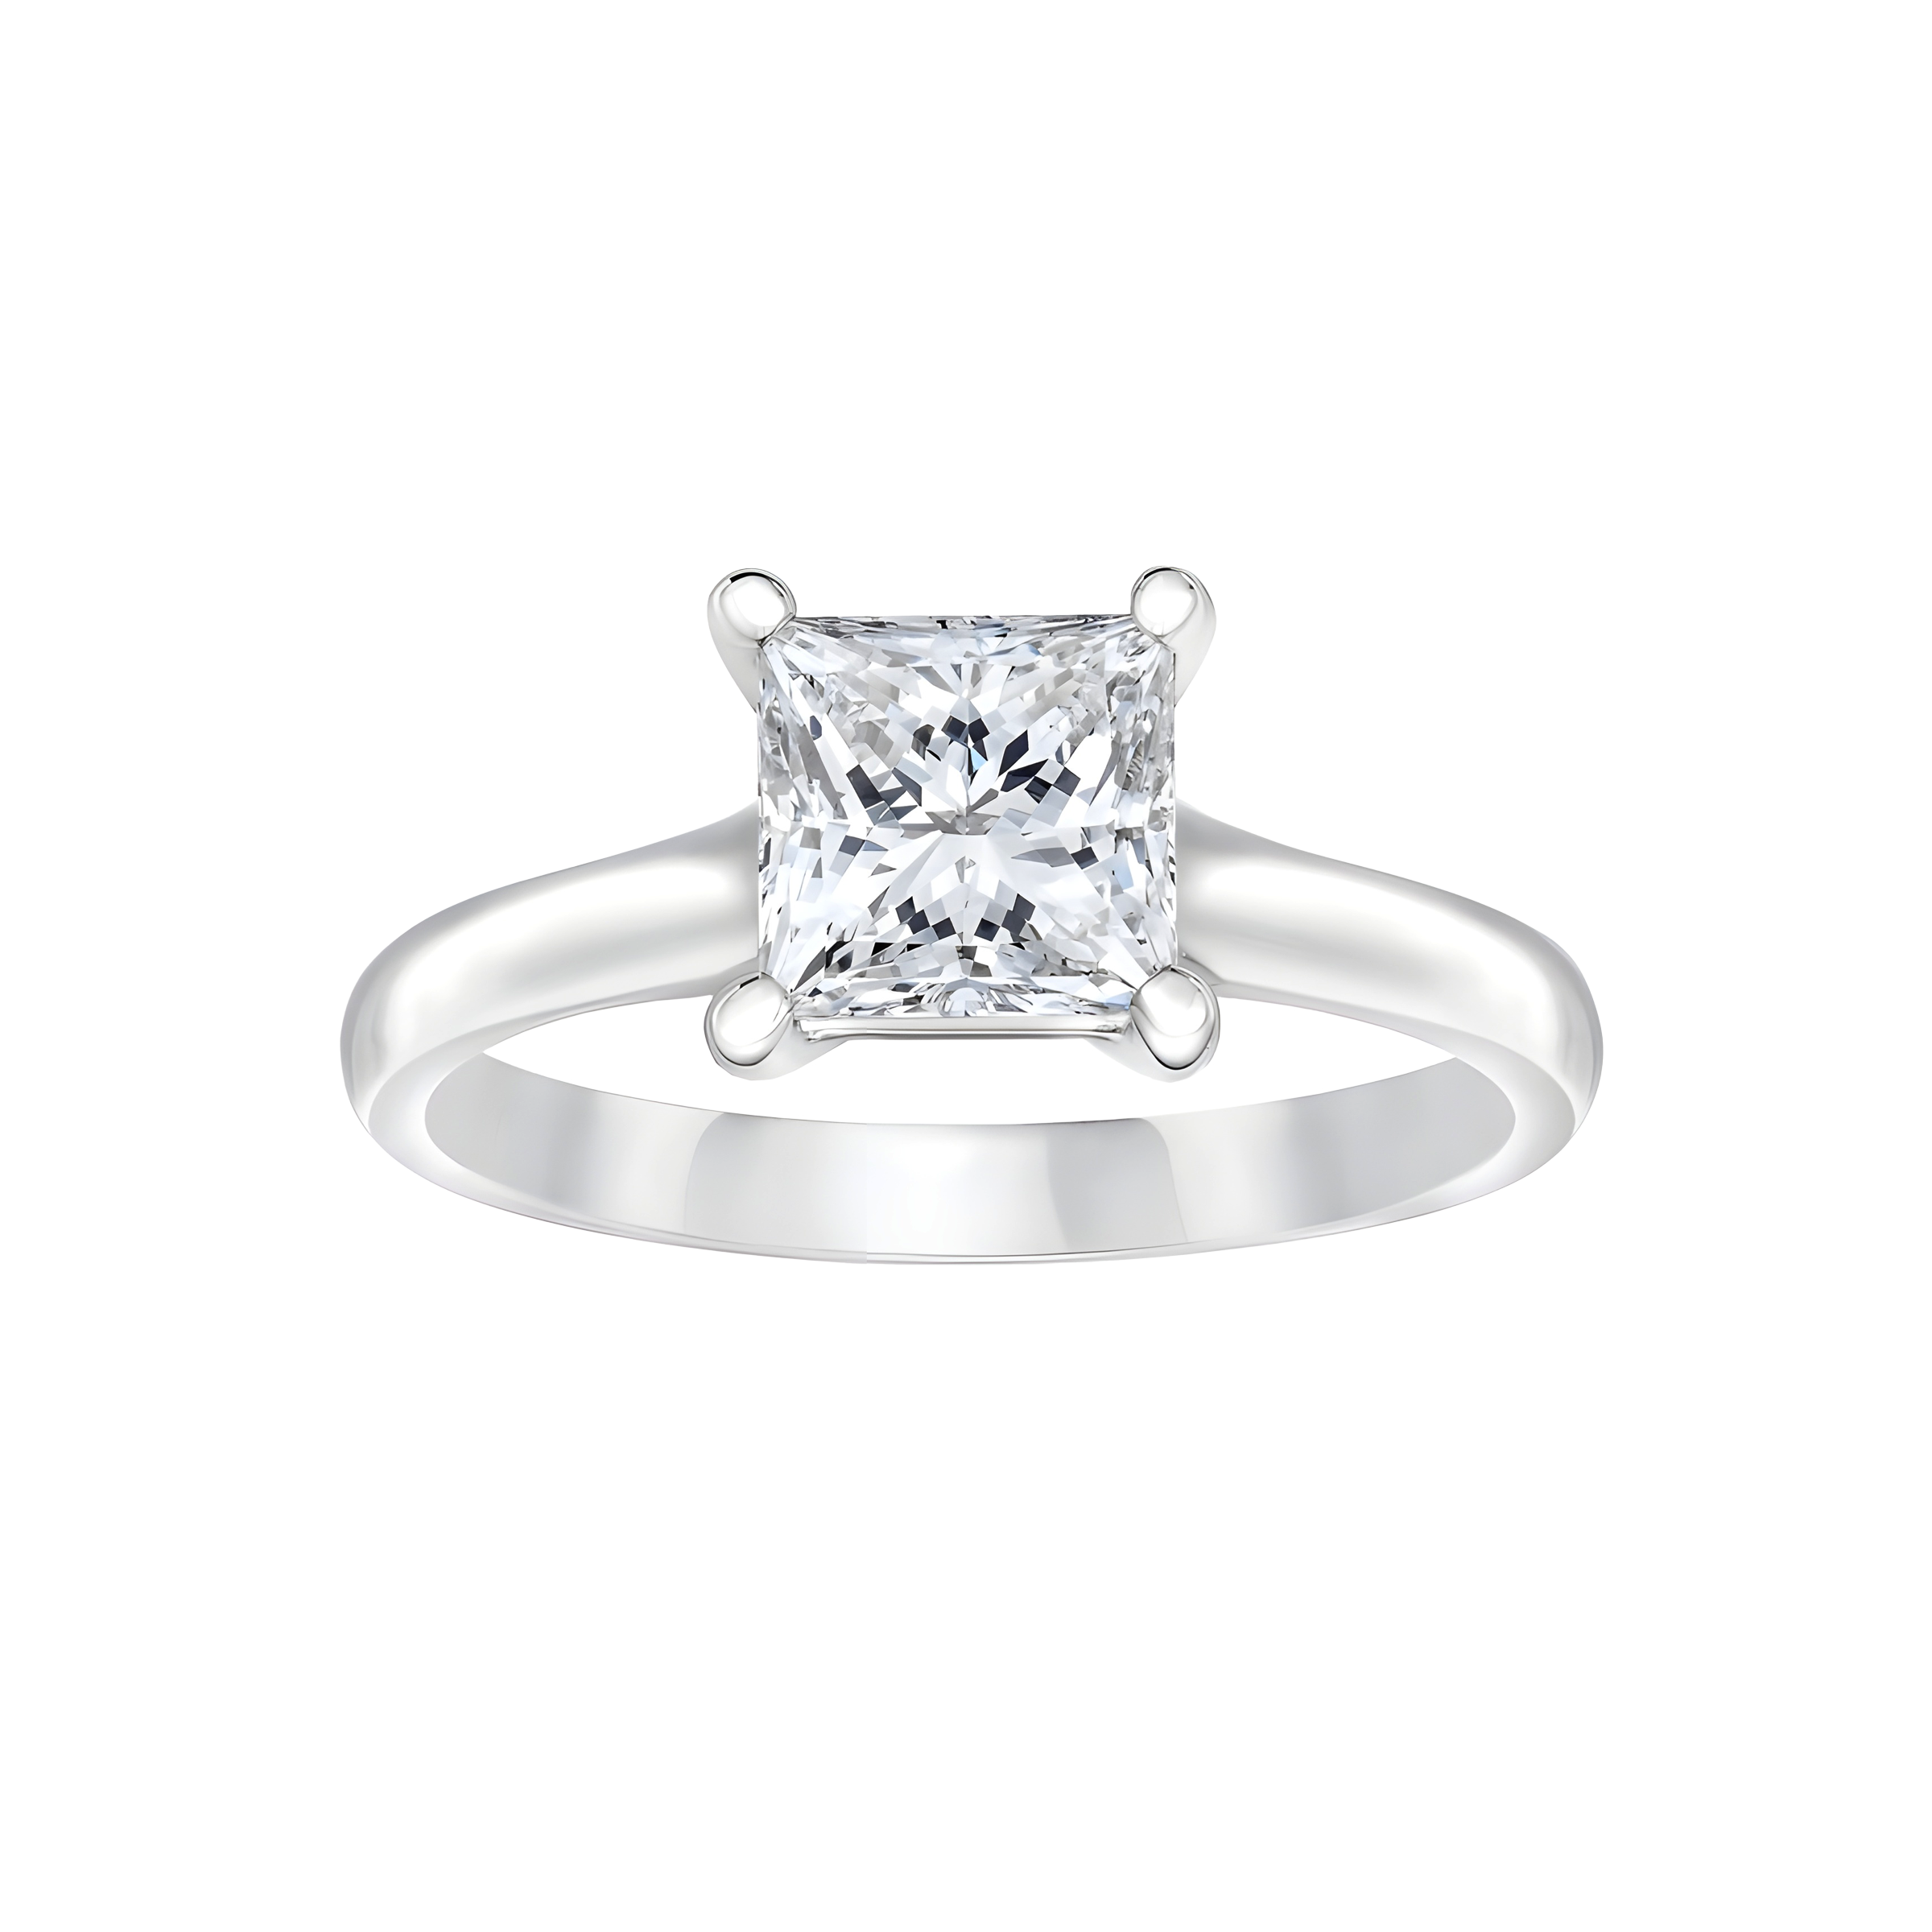 Princess Cut Solitaire Diamond Engagement Ring in 18K White Gold